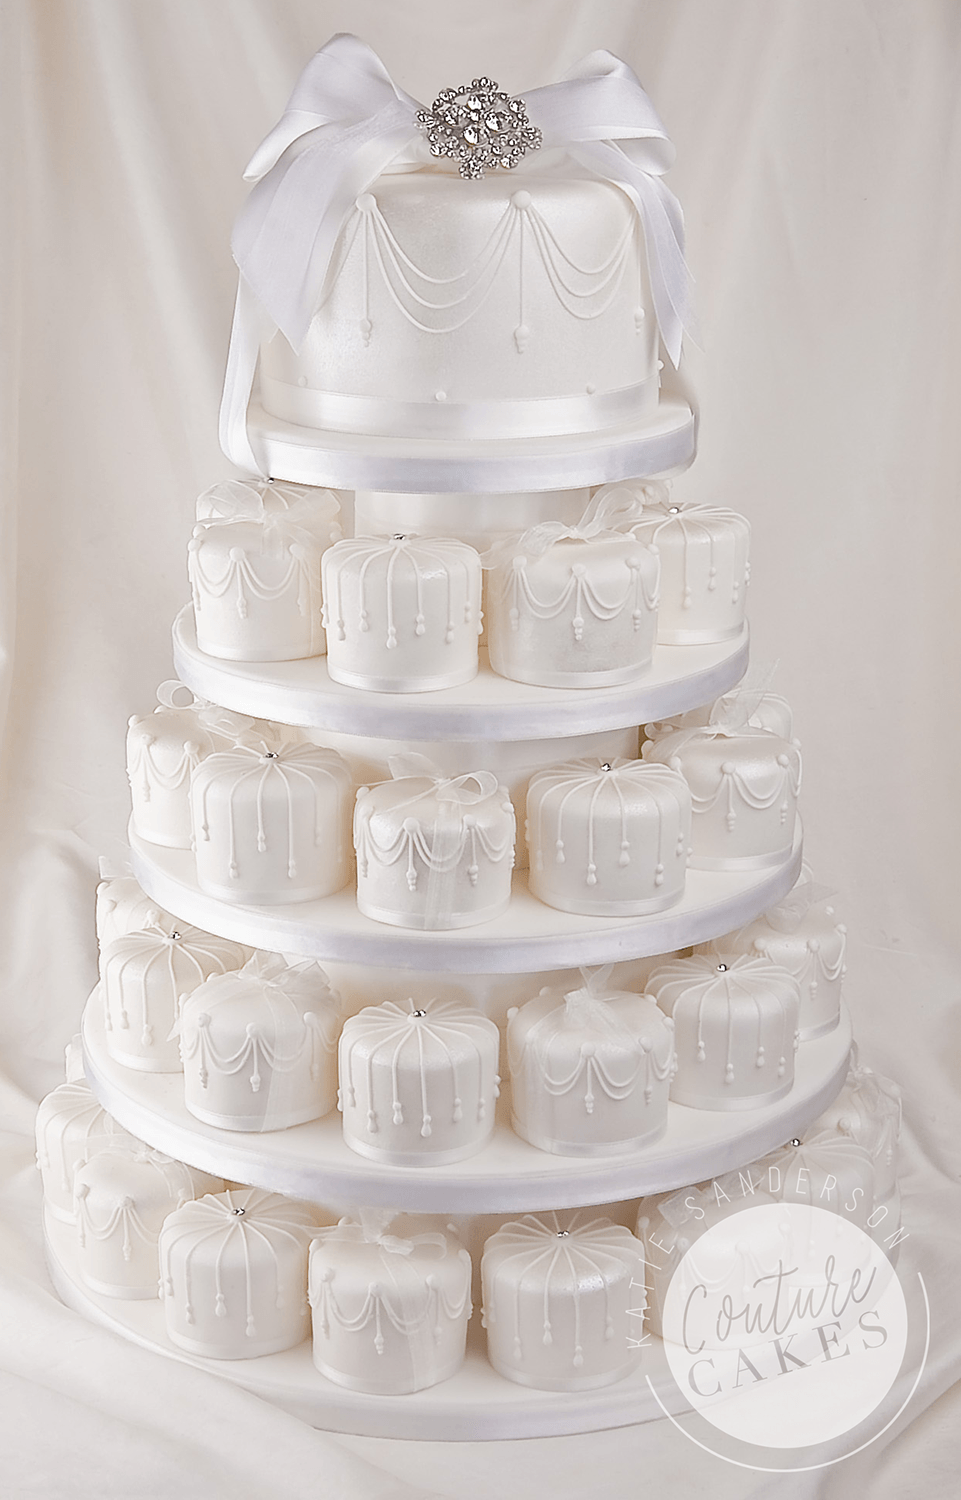 Serves 46 mini cakes and 20 portion top tier, As pictured £577 (for 46 mini cakes and 20 portion top tier